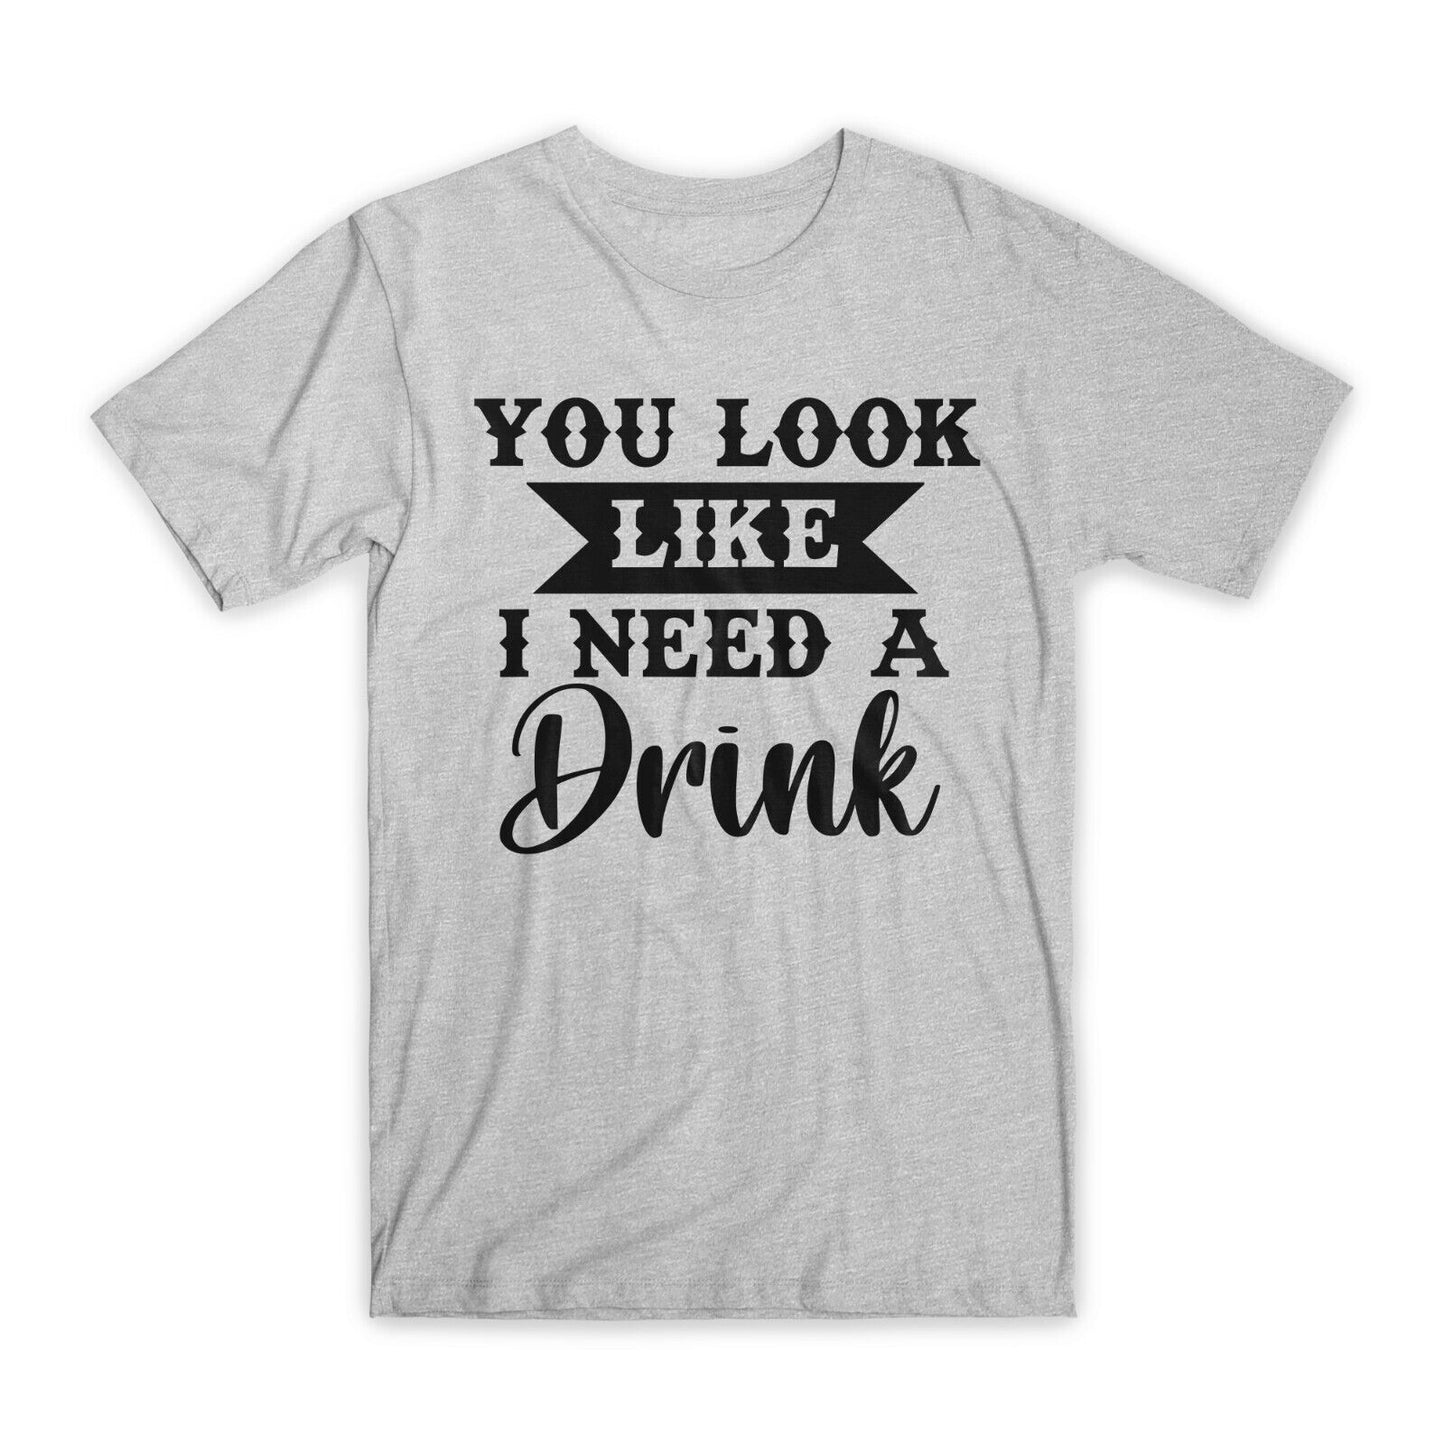 You Look Like I Need A Drink T-Shirt Premium Cotton Crew Neck Funny Tee Gift NEW